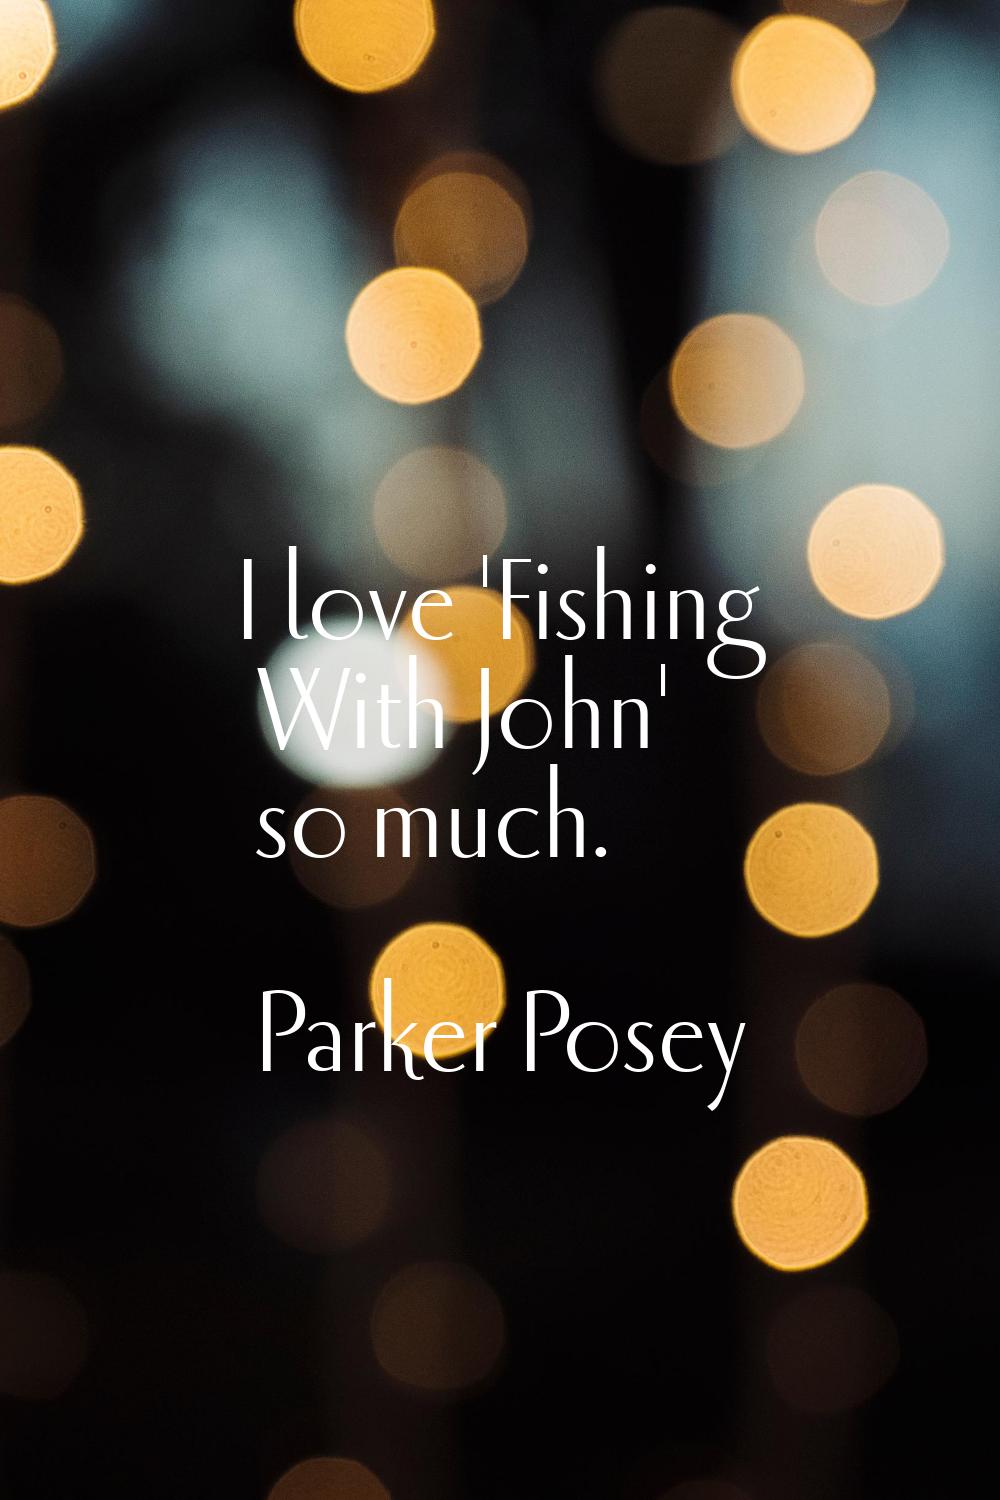 I love 'Fishing With John' so much.